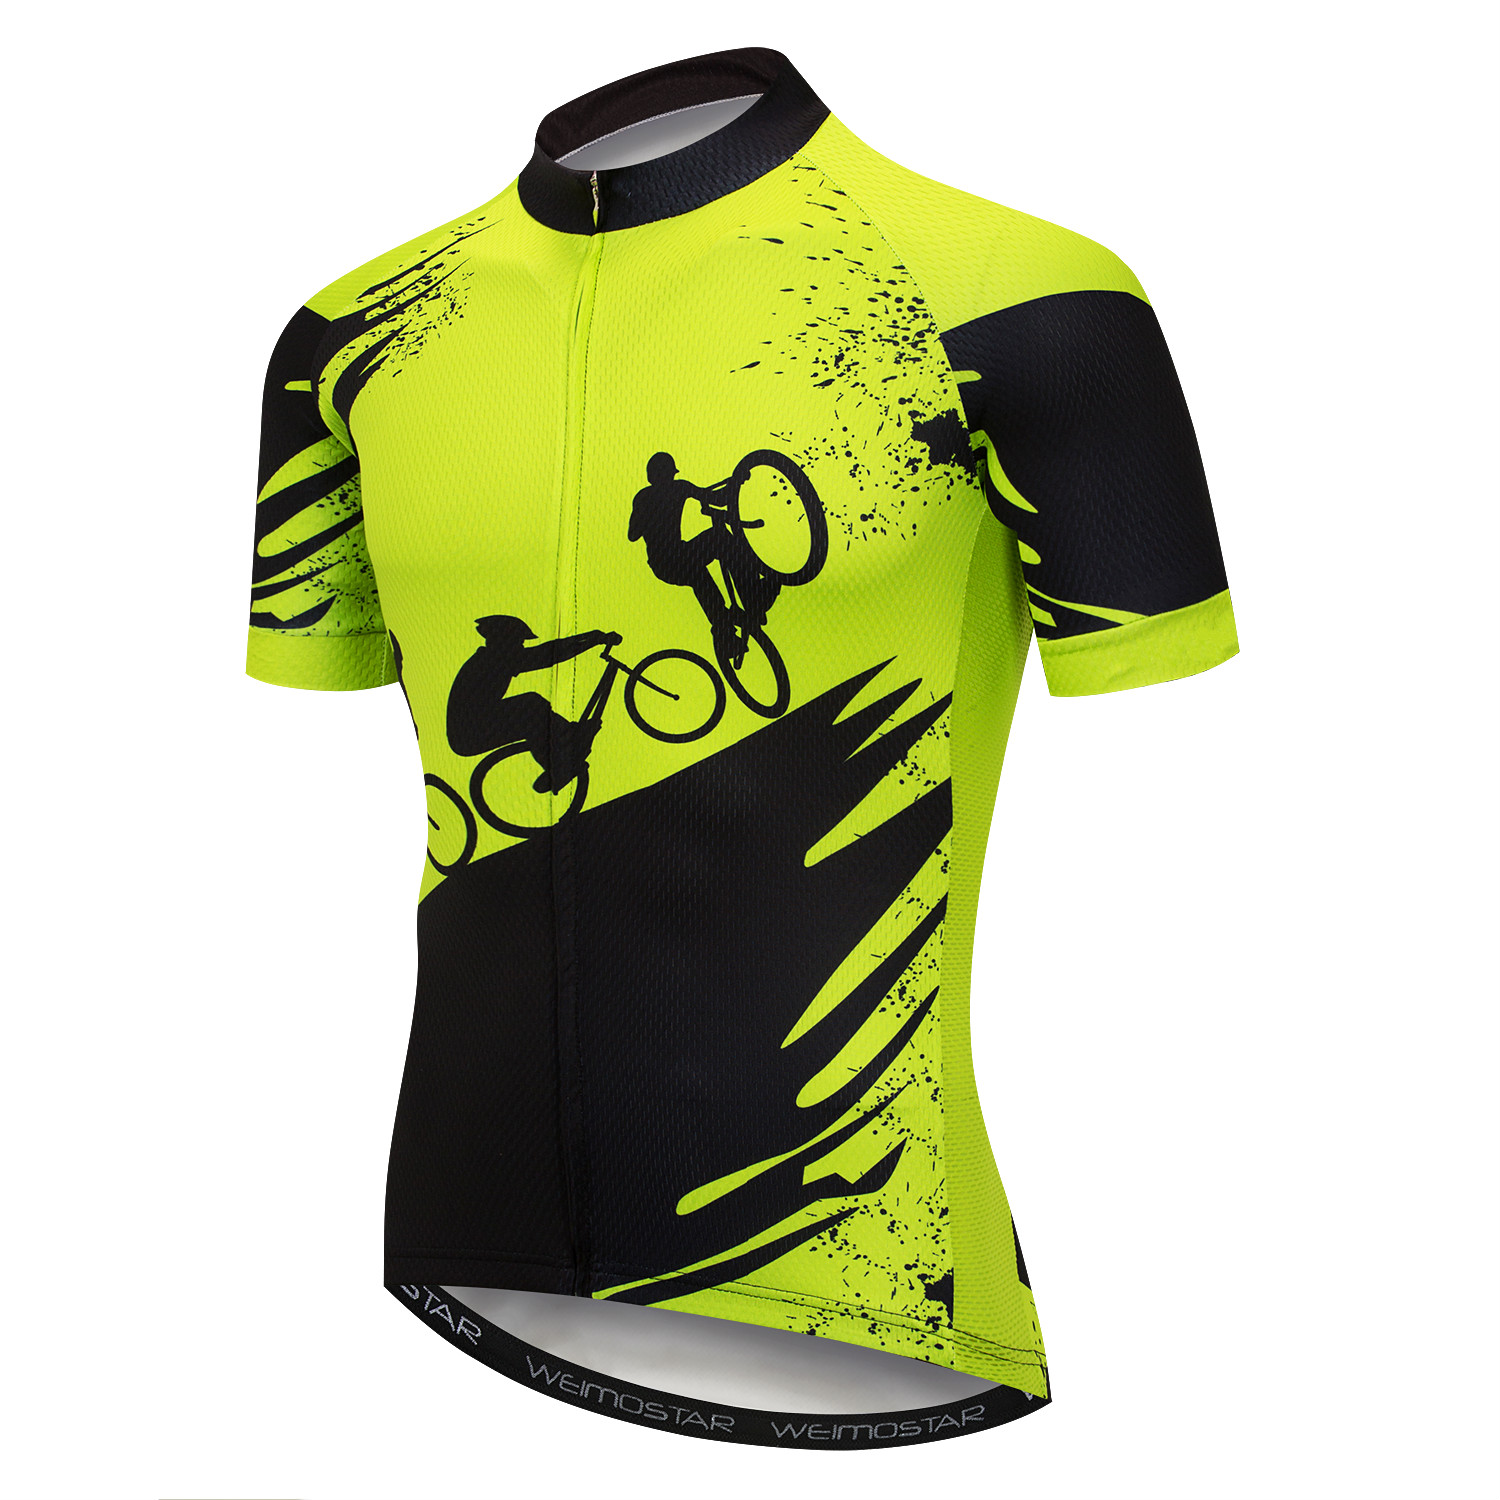 Men's Reflective Cycling Jersey Top Short Sleeve Bike Bicycle Coolmax ...